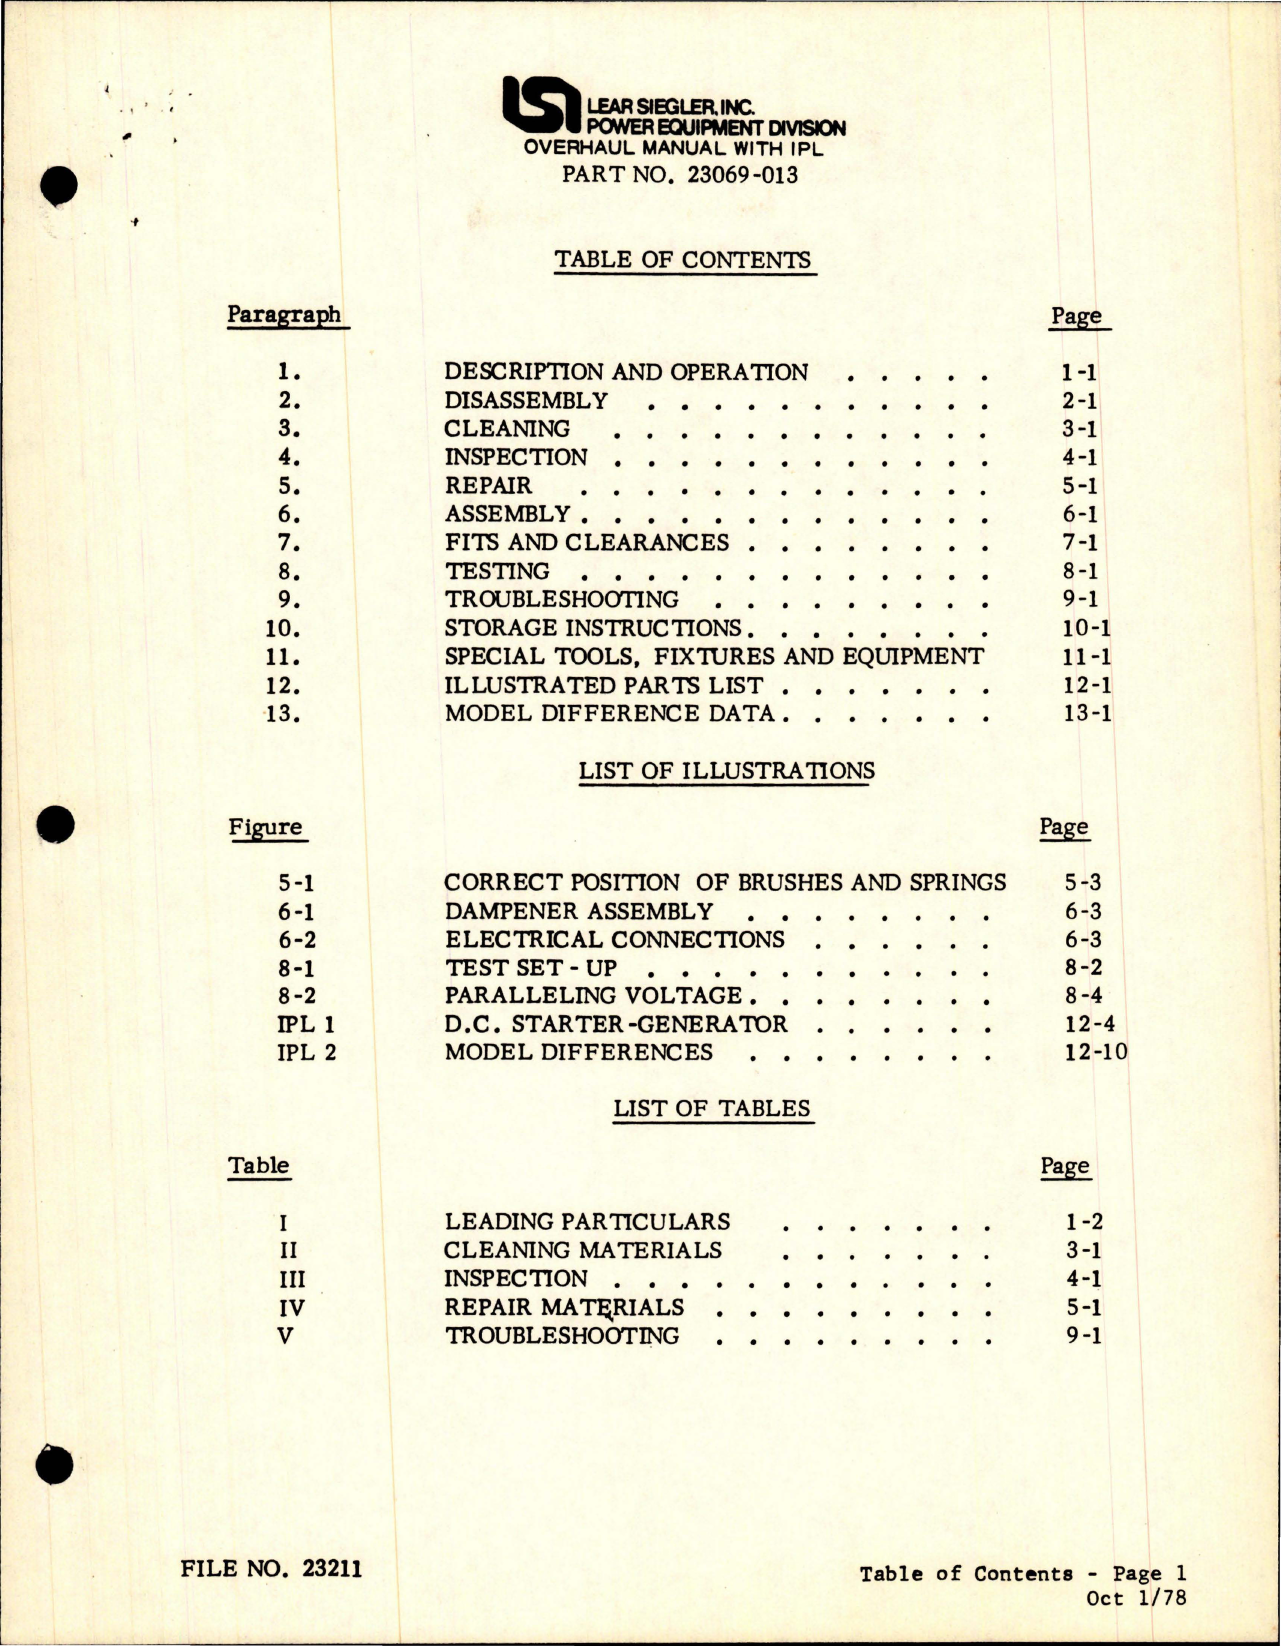 Sample page 7 from AirCorps Library document: Overhaul with Illustrated Parts List for DC Starter Generator 